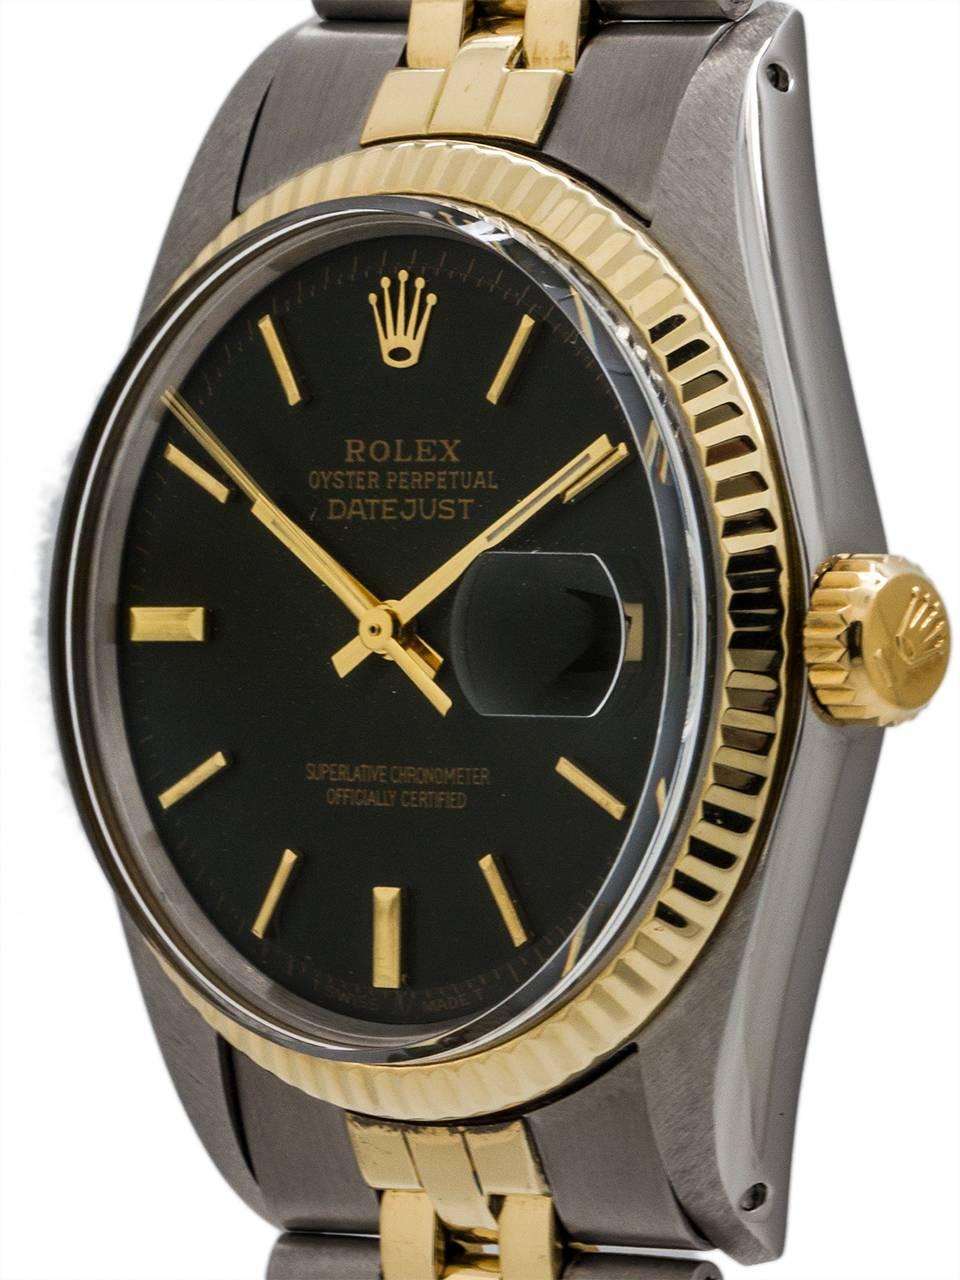 Vintage man’s Rolex Datejust stainless steel and 14K gold circa 1972. Full size man’s dress model 36mm diameter Oyster case with 14K yellow gold fluted bezel, signed screw down crown and acrylic crystal. With great looking professionally restored